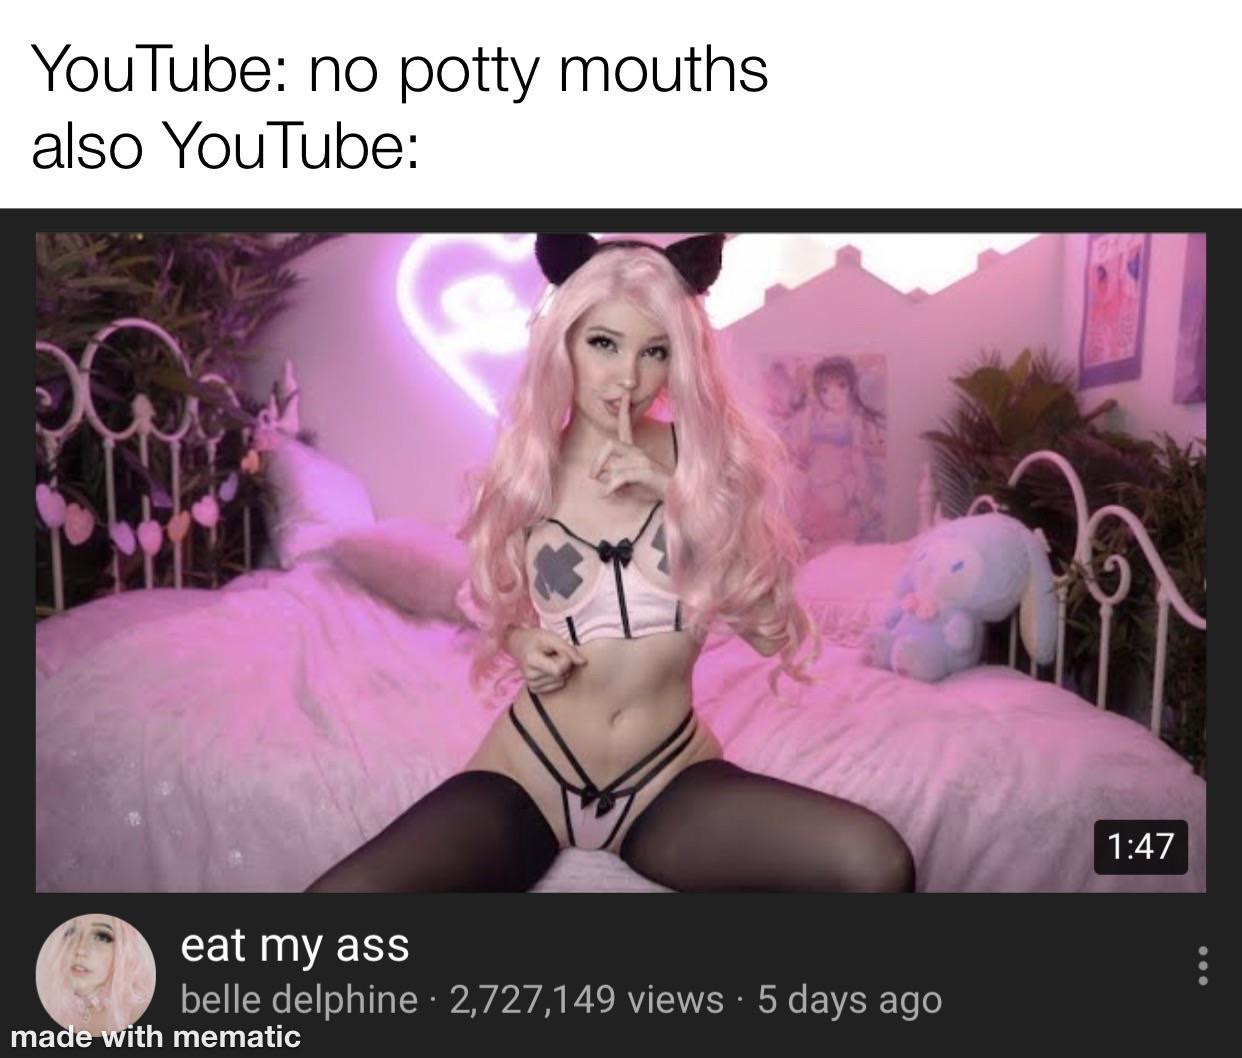 dank meme - enwin - YouTube no potty mouths also YouTube eat my ass belle delphine 2,727,149 views 5 days ago made with mematic